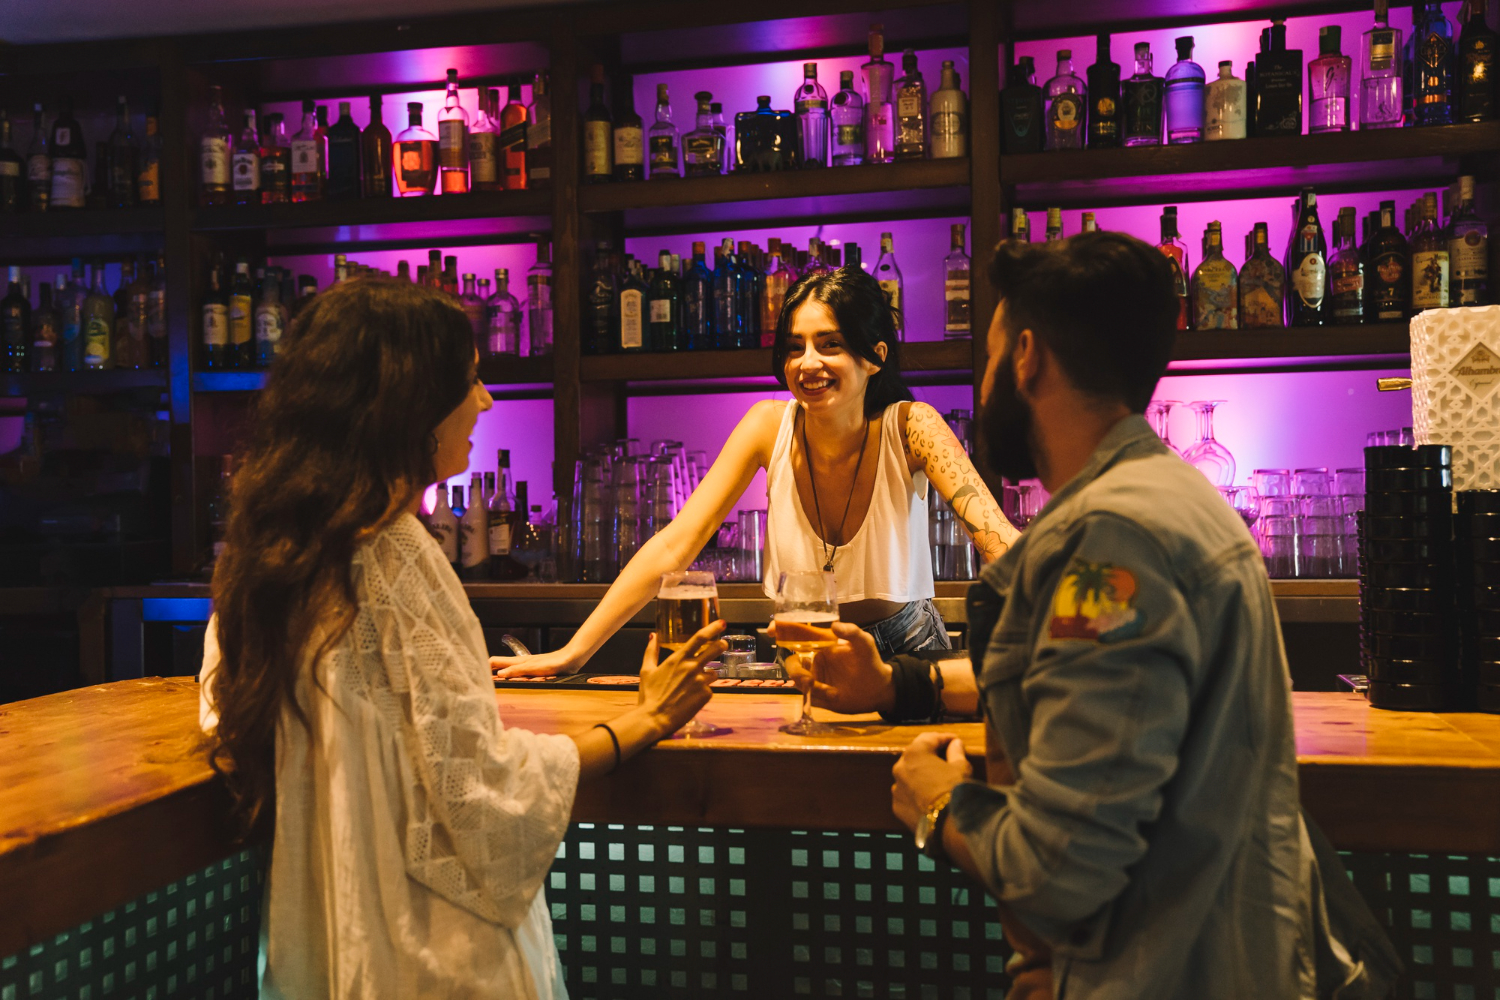 A woman bartender stands behind a bar, chatting with two patrons on the other side of the bar.